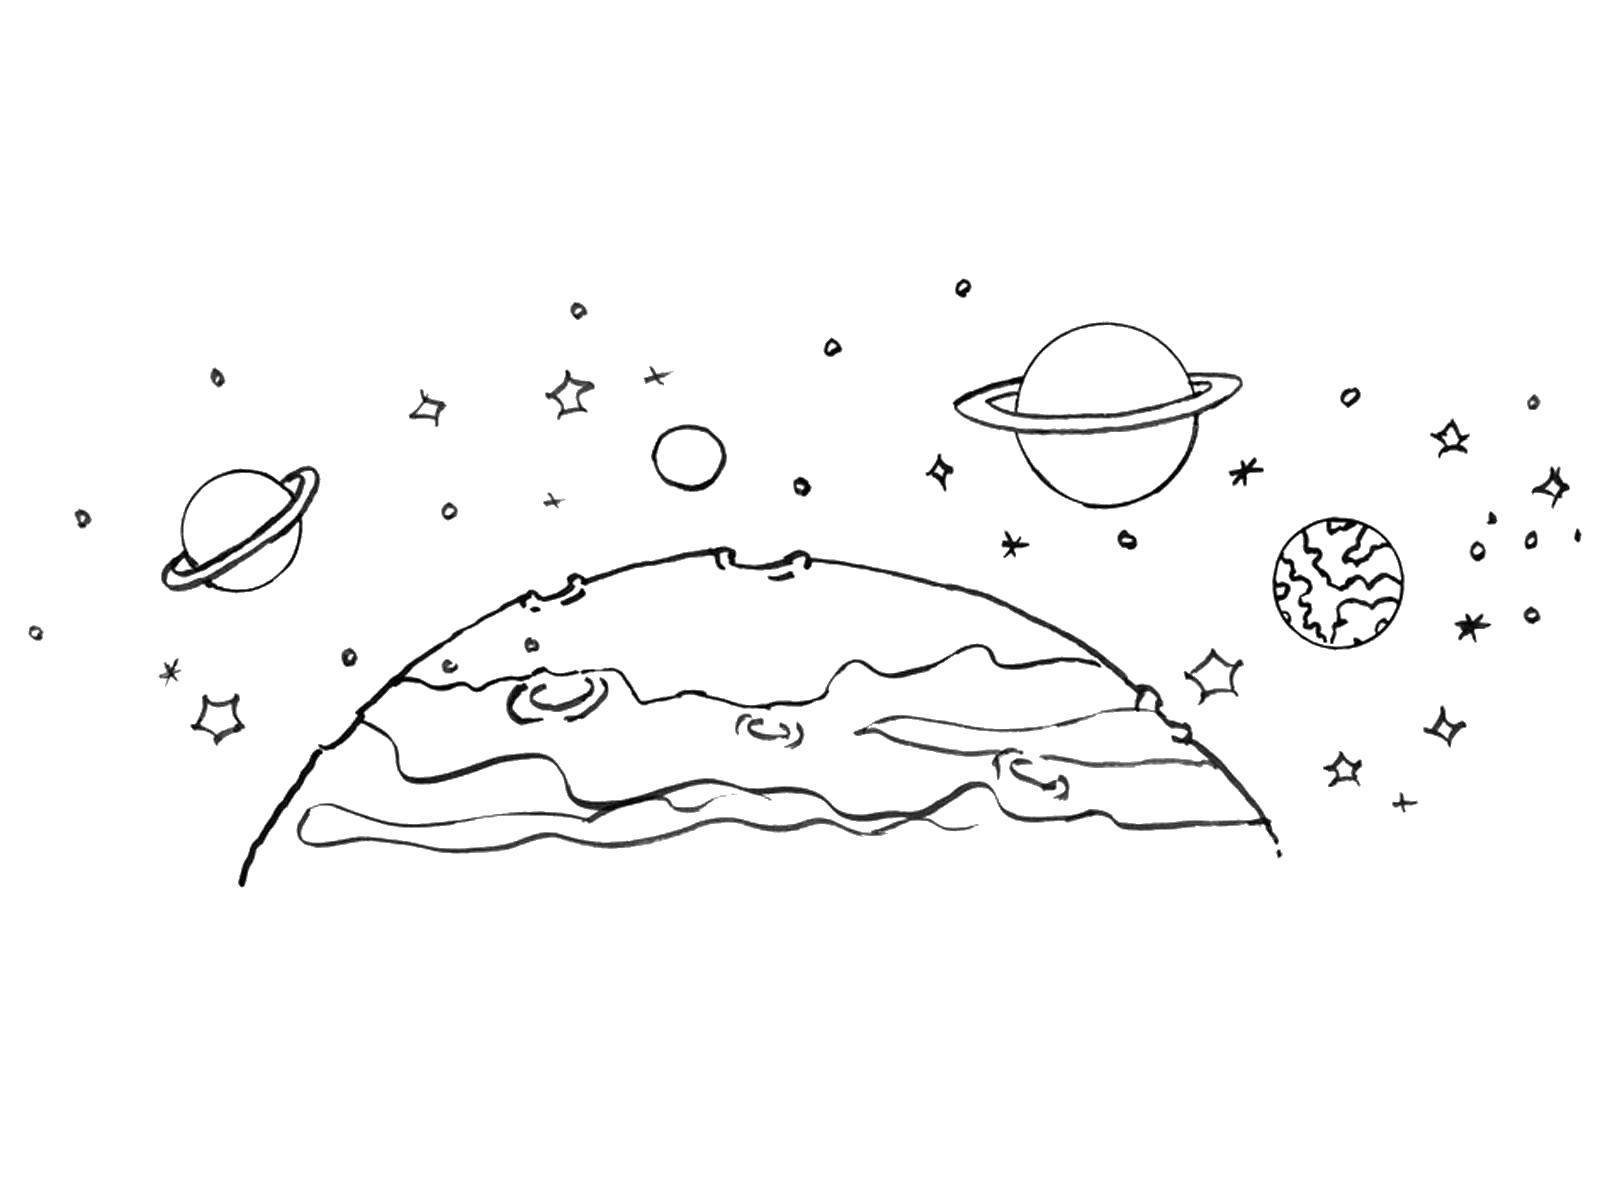 Coloring Planet in space. Category space. Tags:  Space, planet, universe, Galaxy.